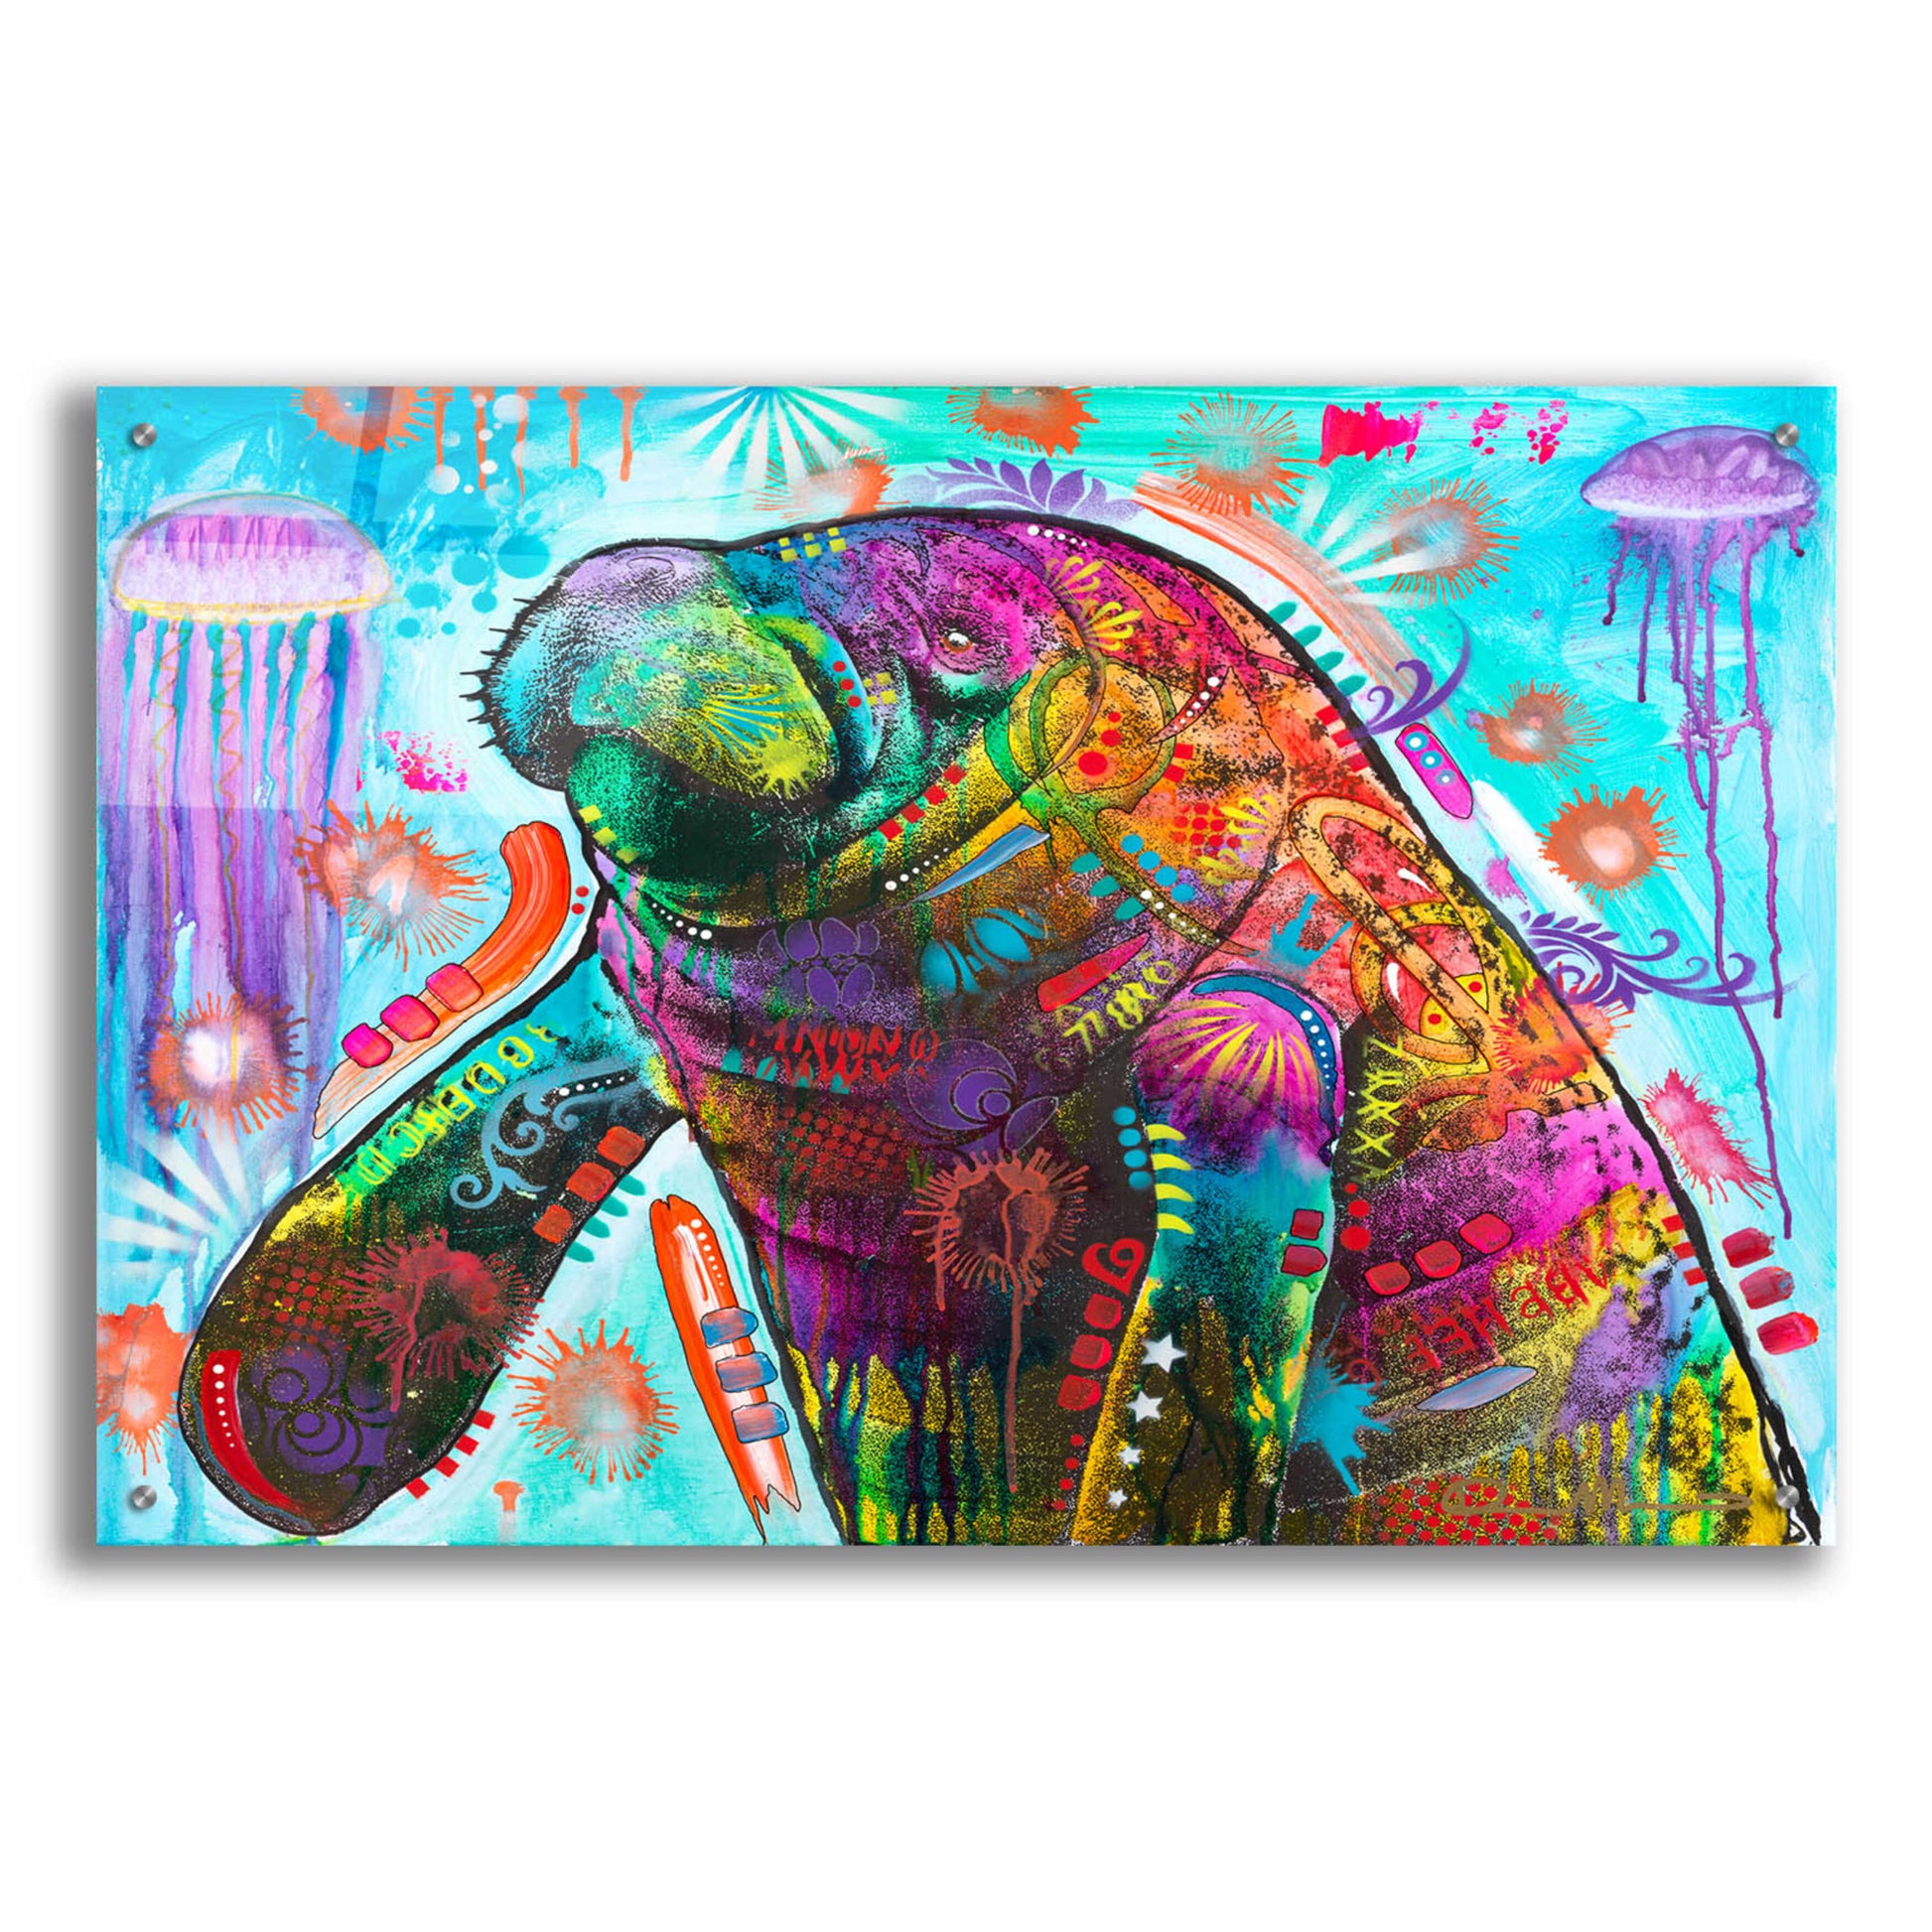 Epic Art 'Manatee' by Dean Russo, Acrylic Glass Wall Art,36x24